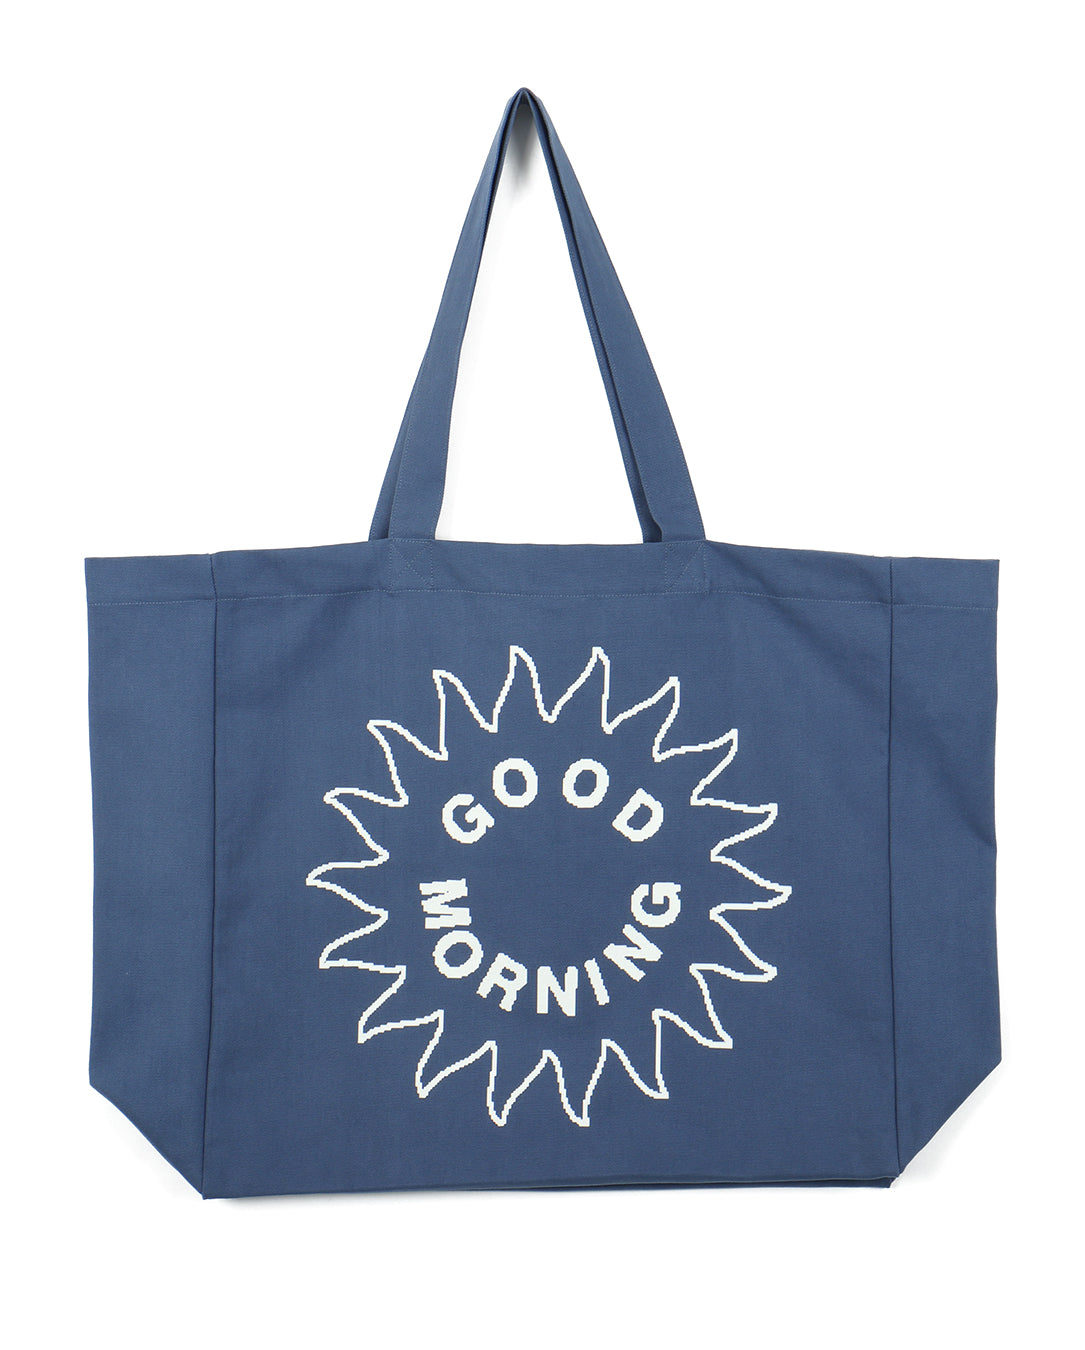 Music to dream by Tote Bag sea